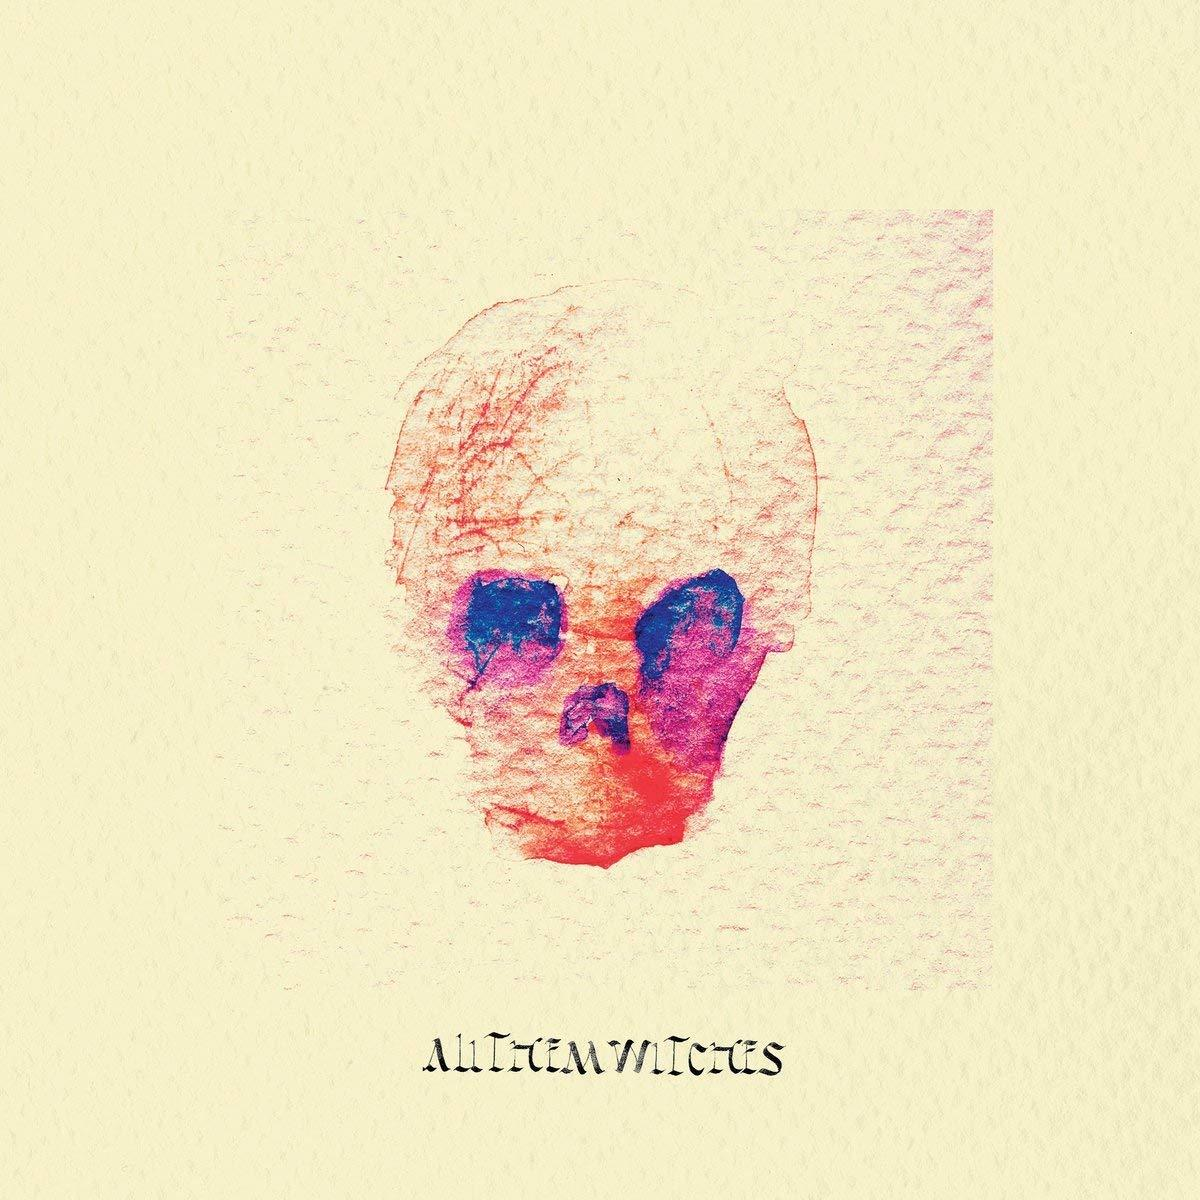 All - ATW - Witches (CD) Them